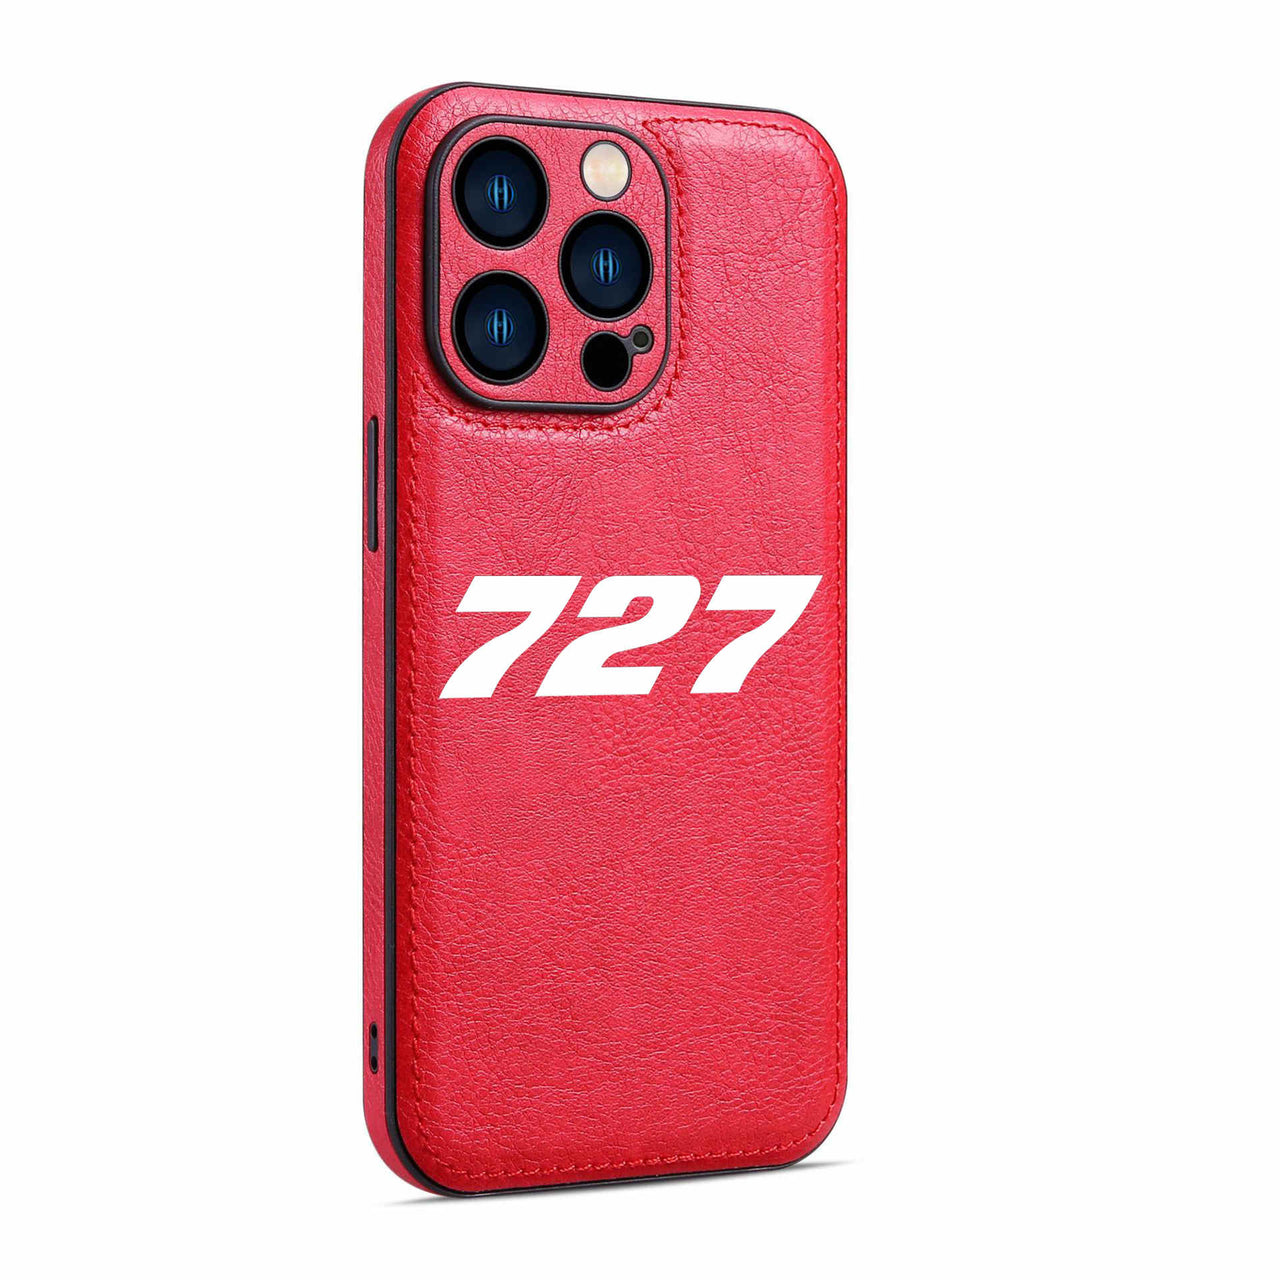 727 Flat Text Designed Leather iPhone Cases